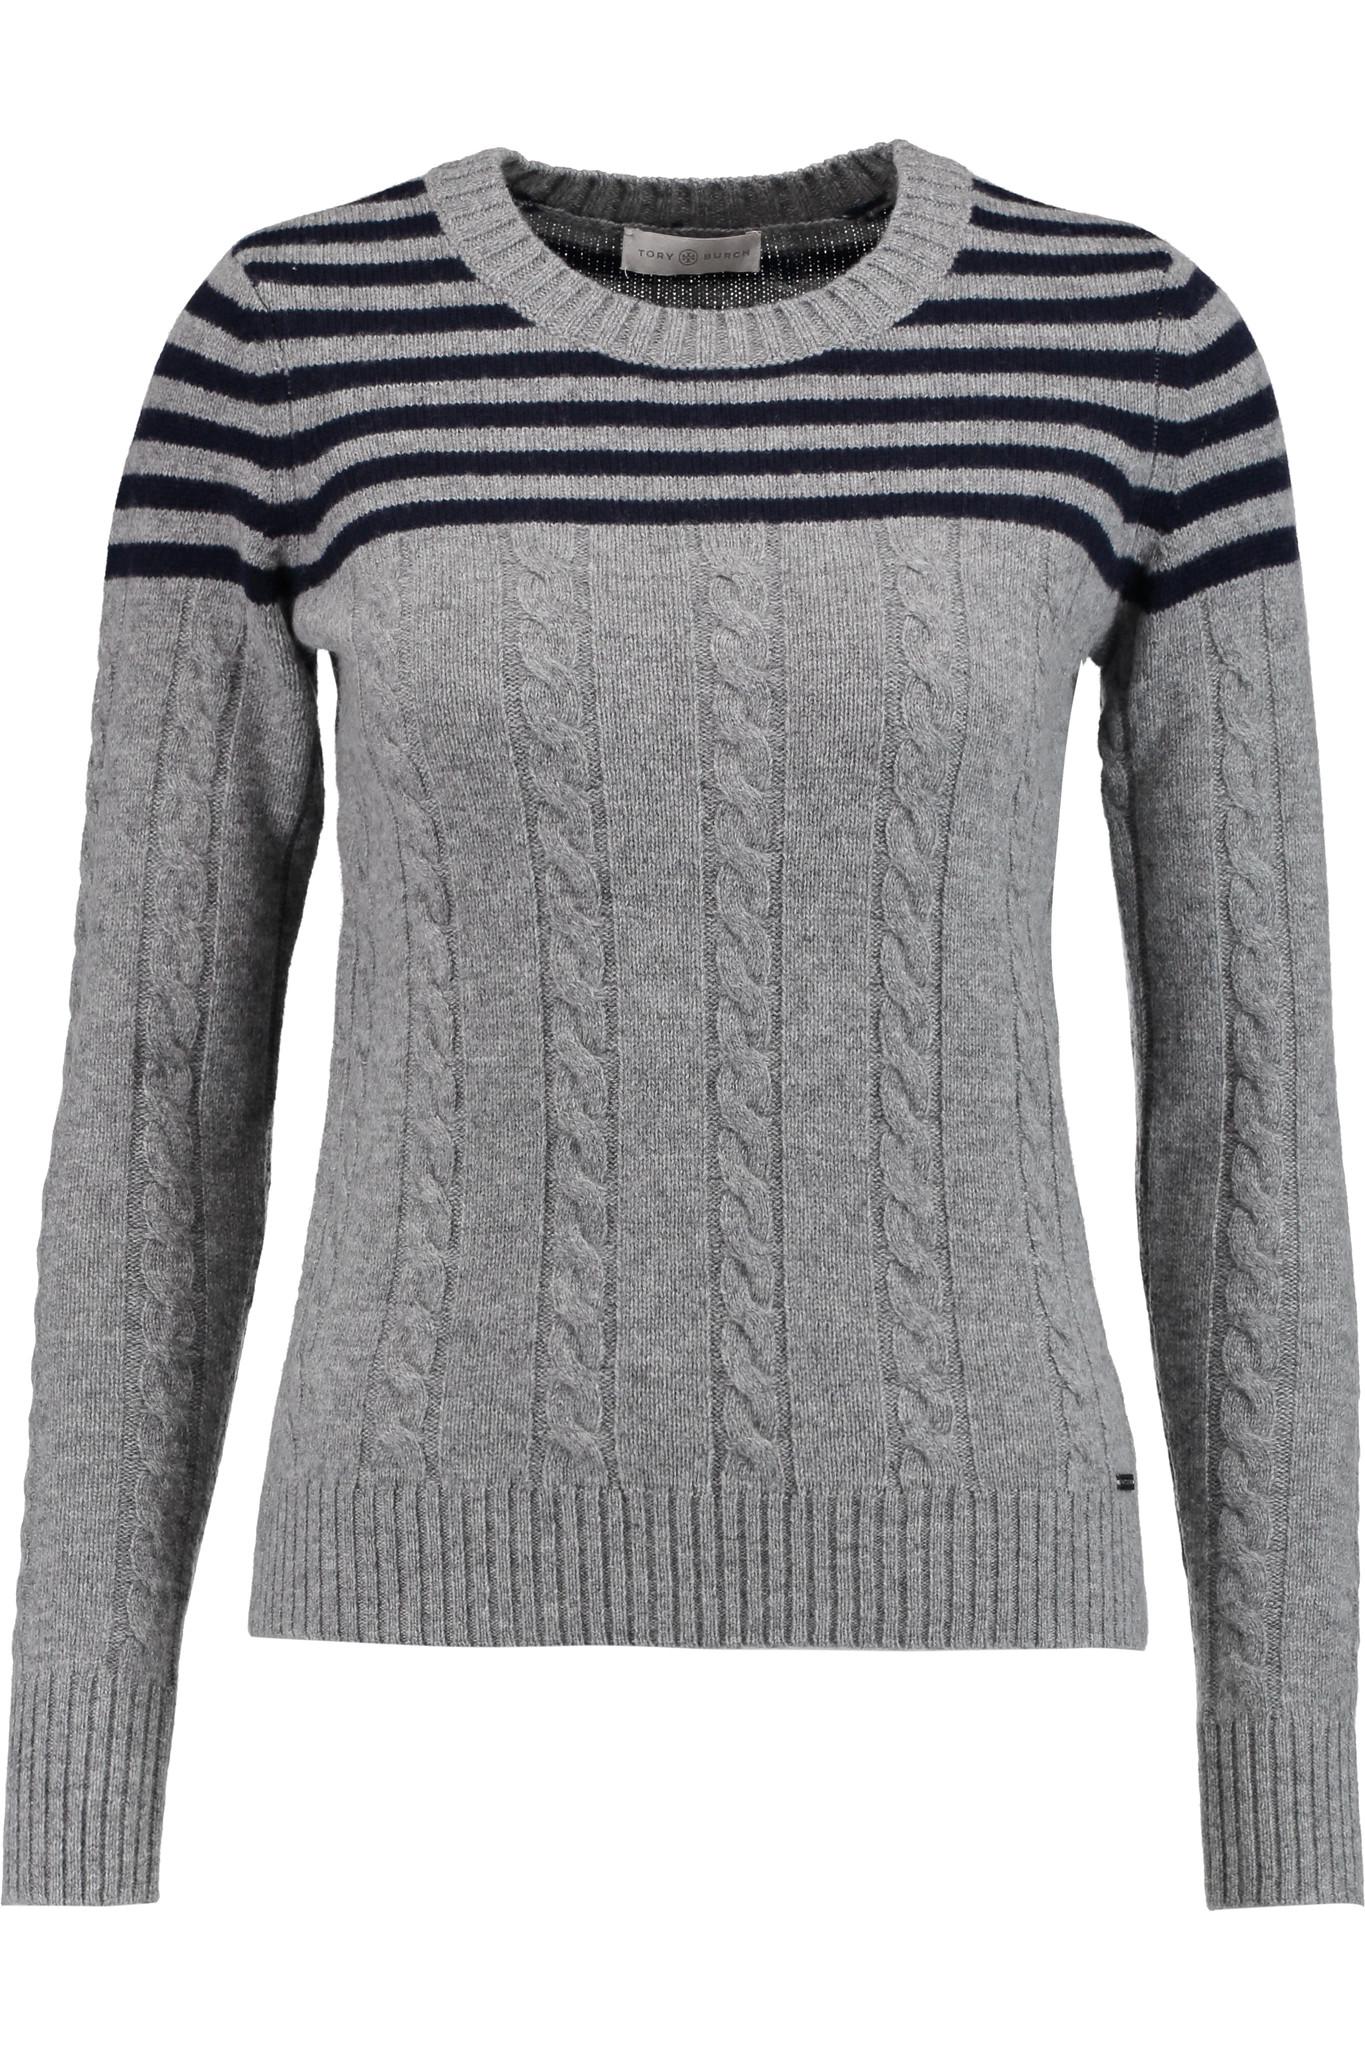 Lyst - Tory Burch Sharlene Ribbed Cable-knit Sweater in Gray